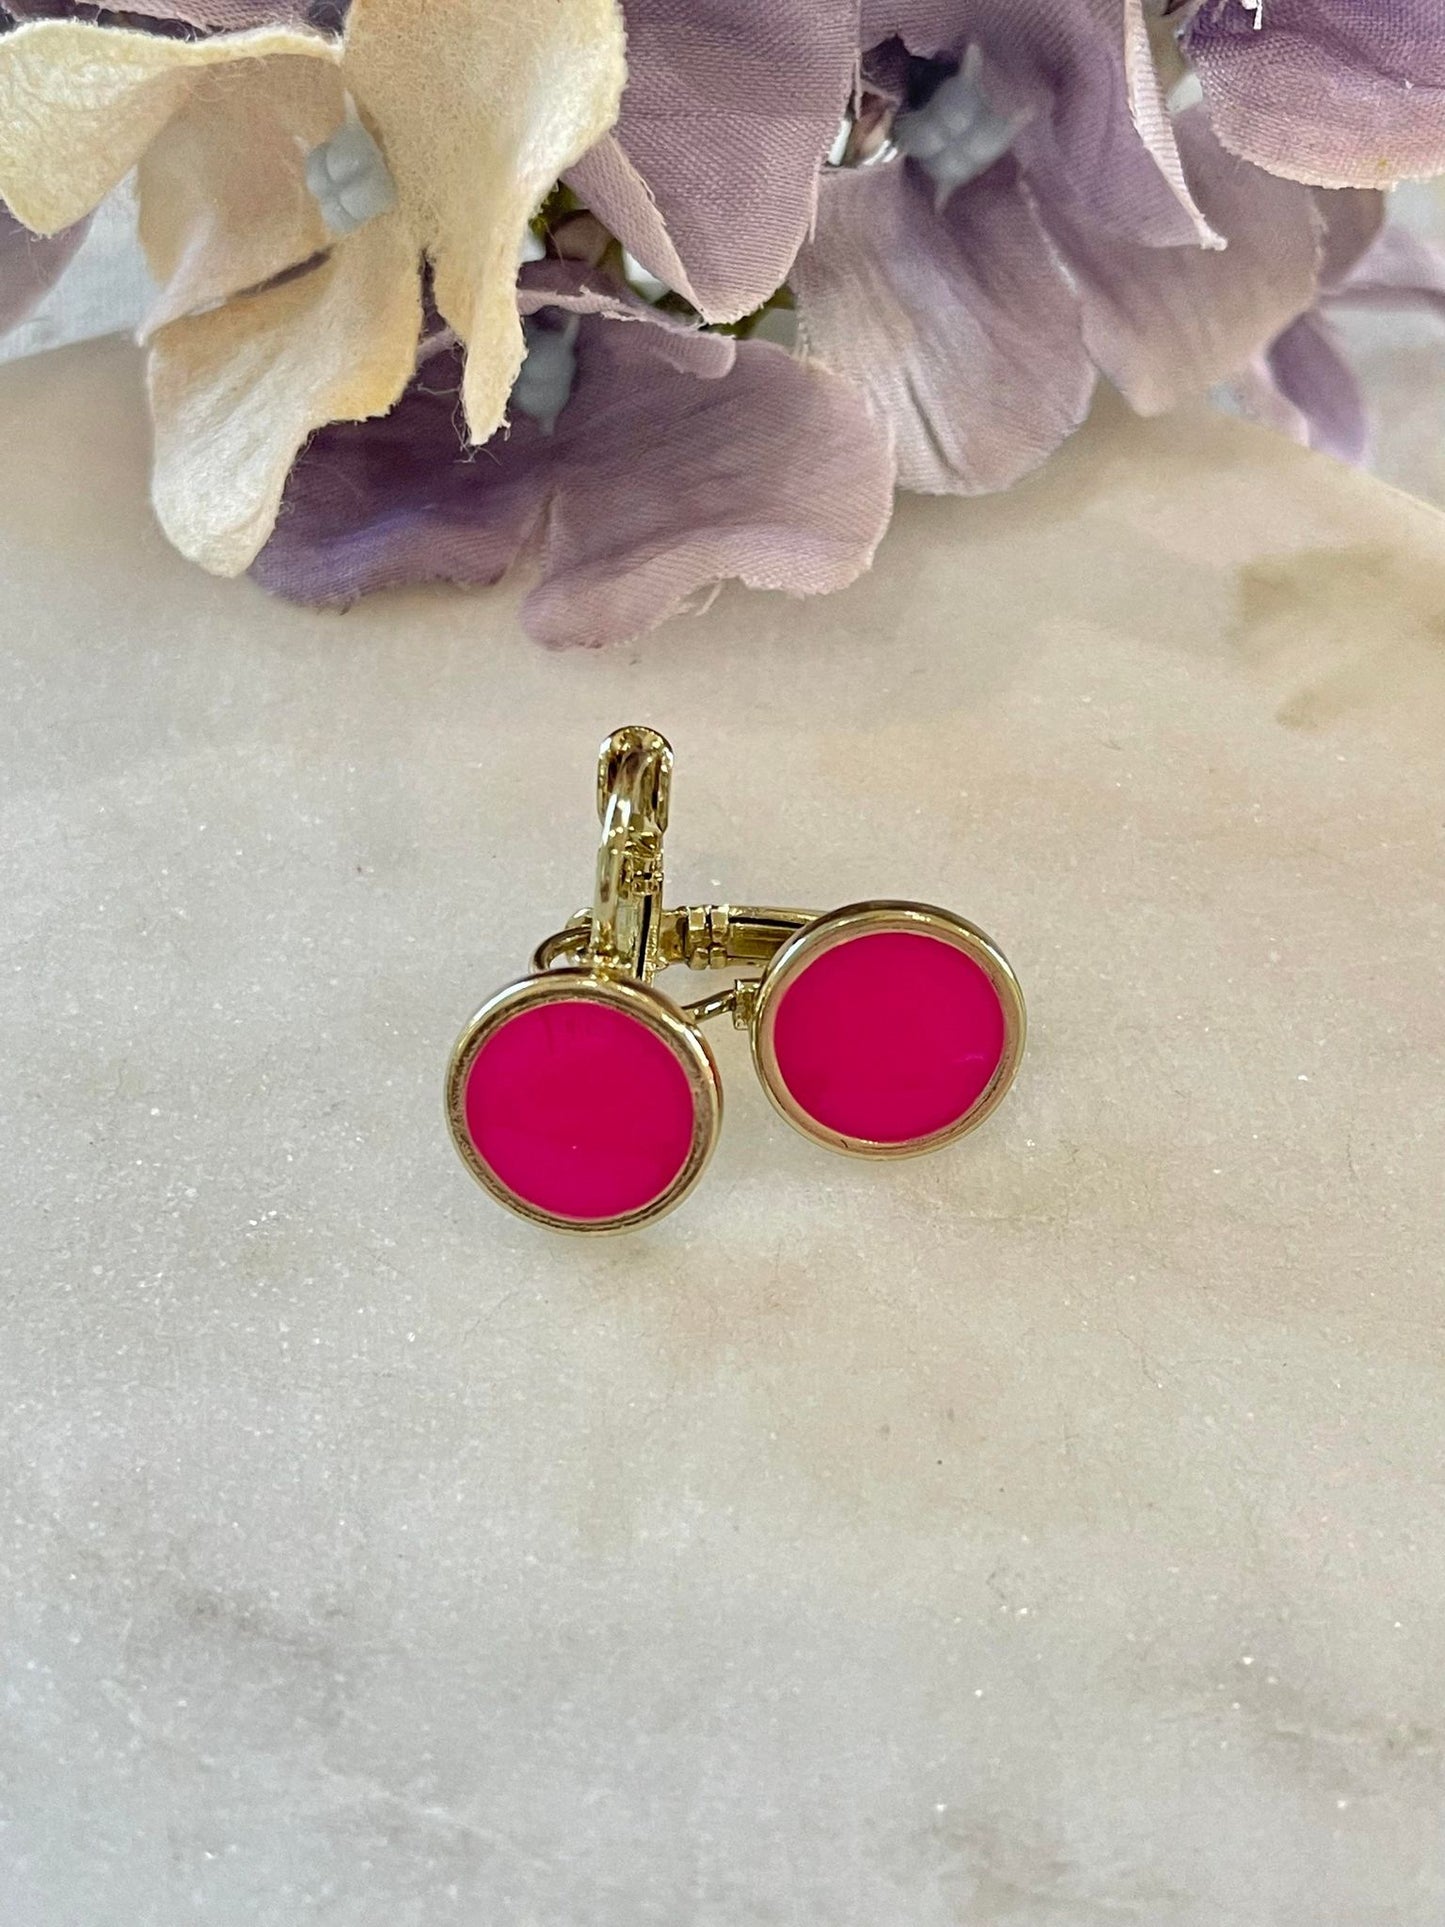 Hot pink enamel button lobster clamp earring - gold